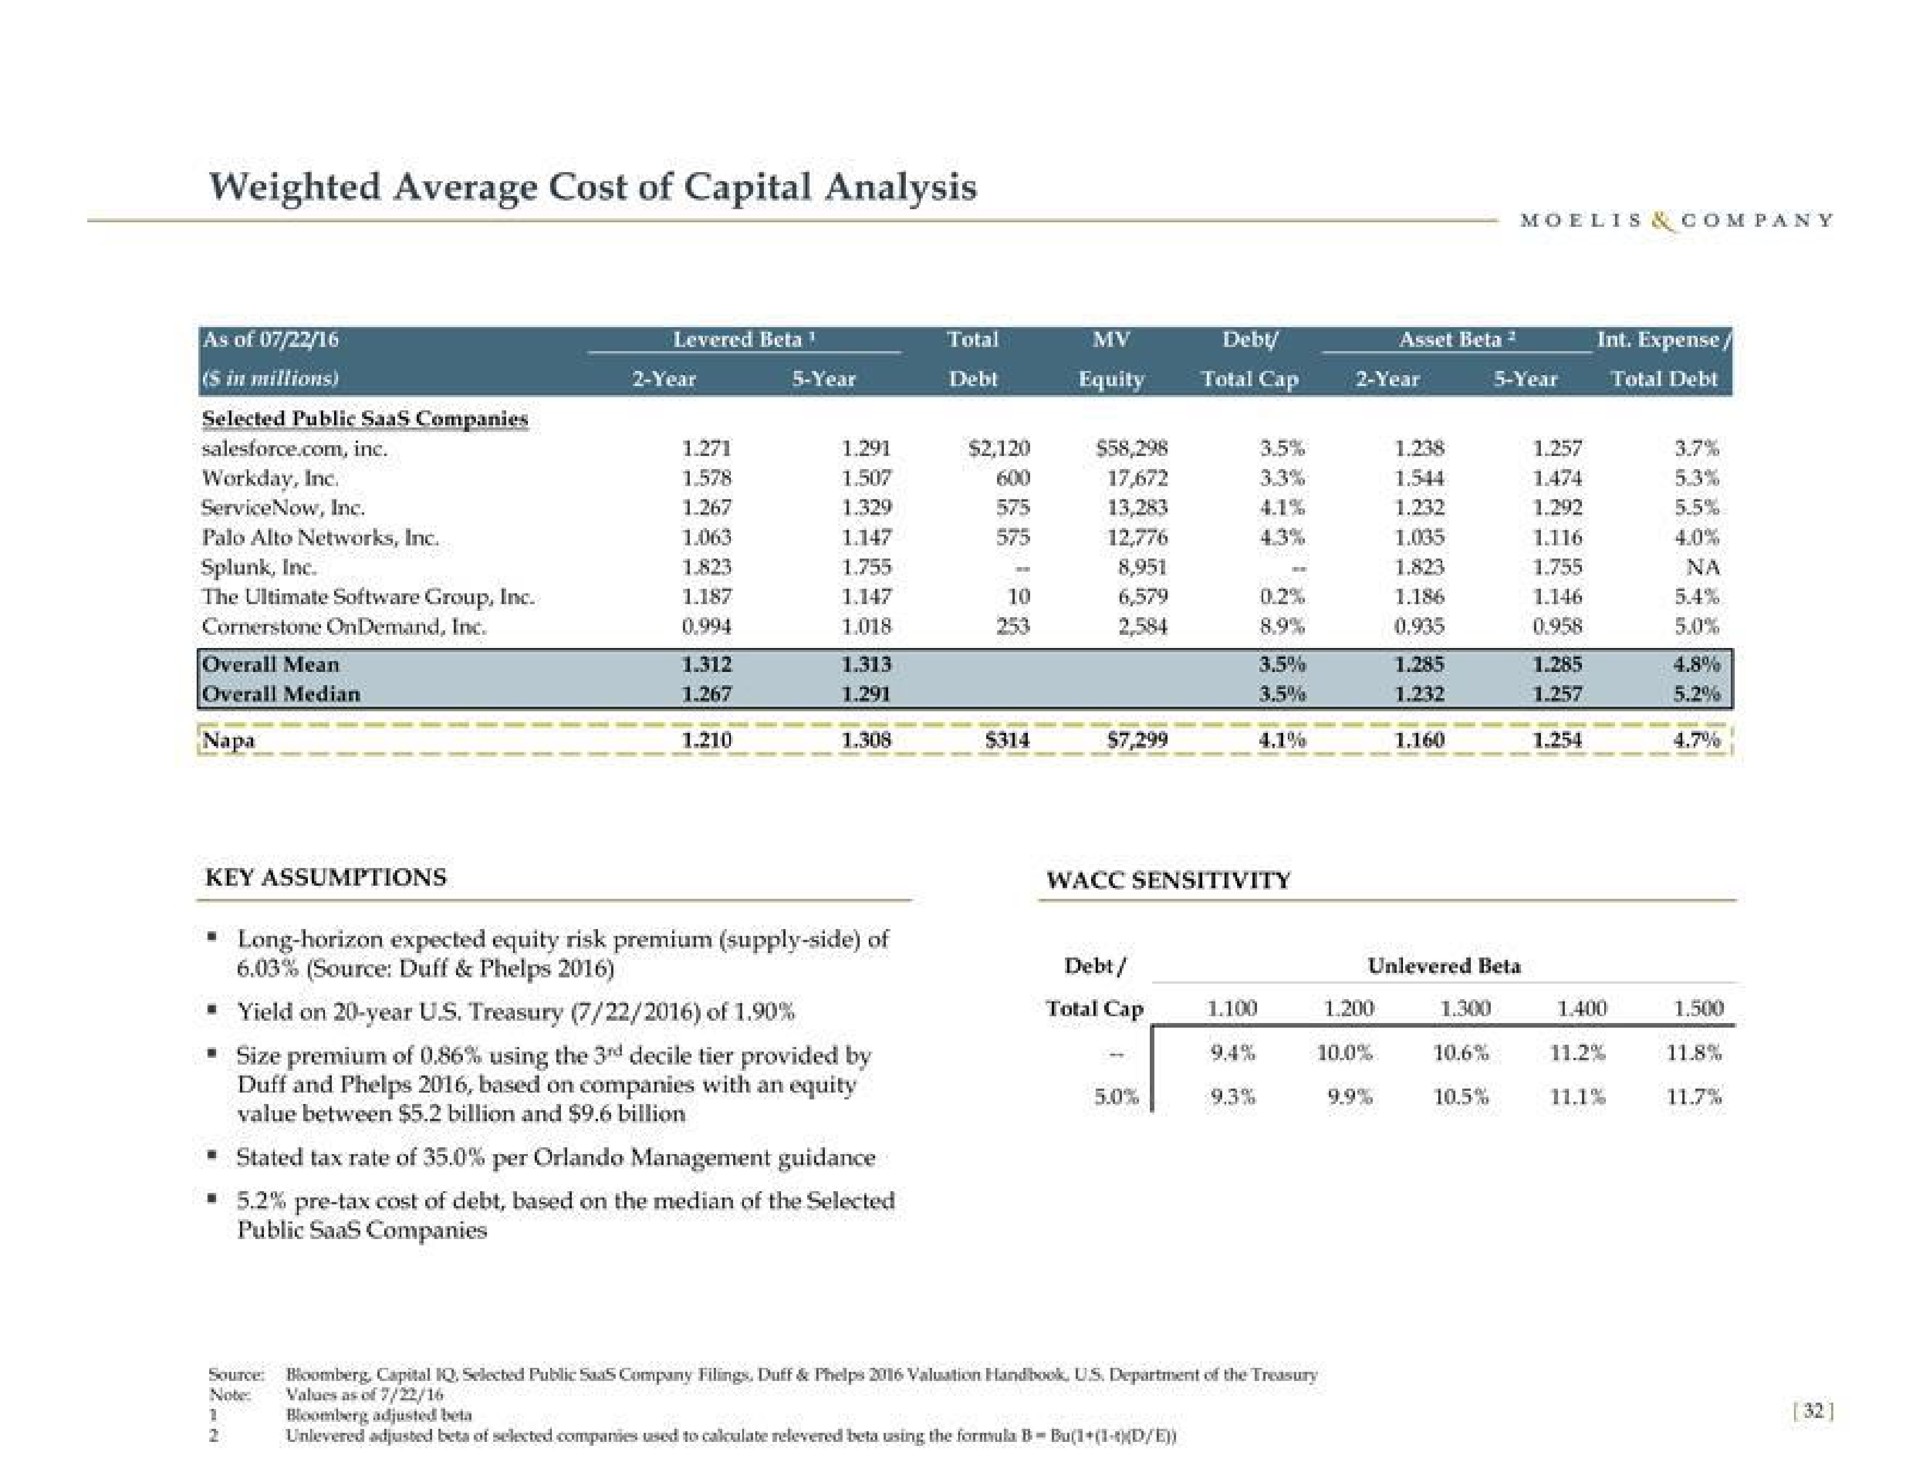 weighted average cost of capital analysis napa a | Moelis & Company